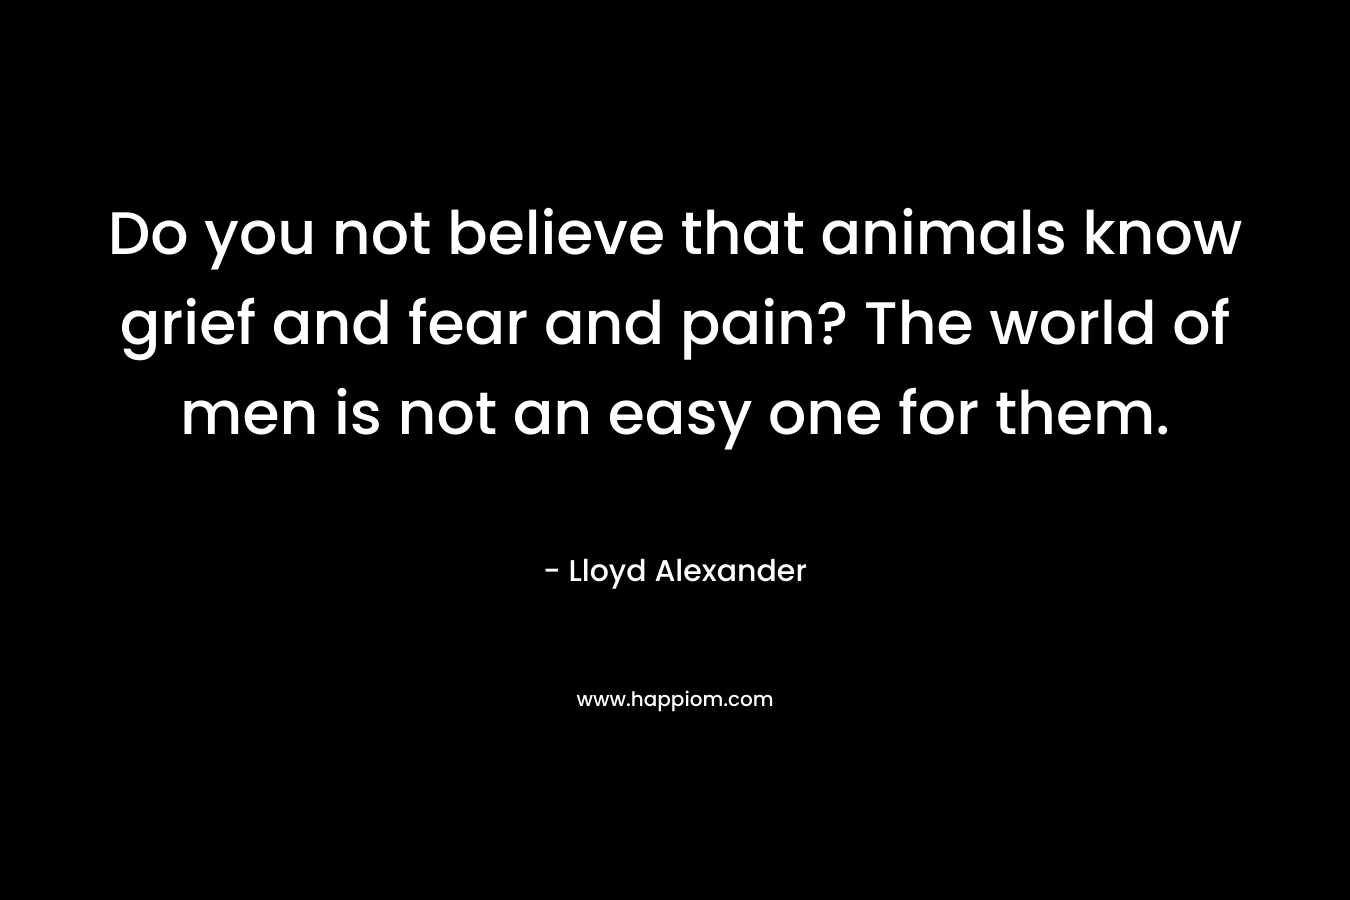 Do you not believe that animals know grief and fear and pain? The world of men is not an easy one for them. – Lloyd Alexander